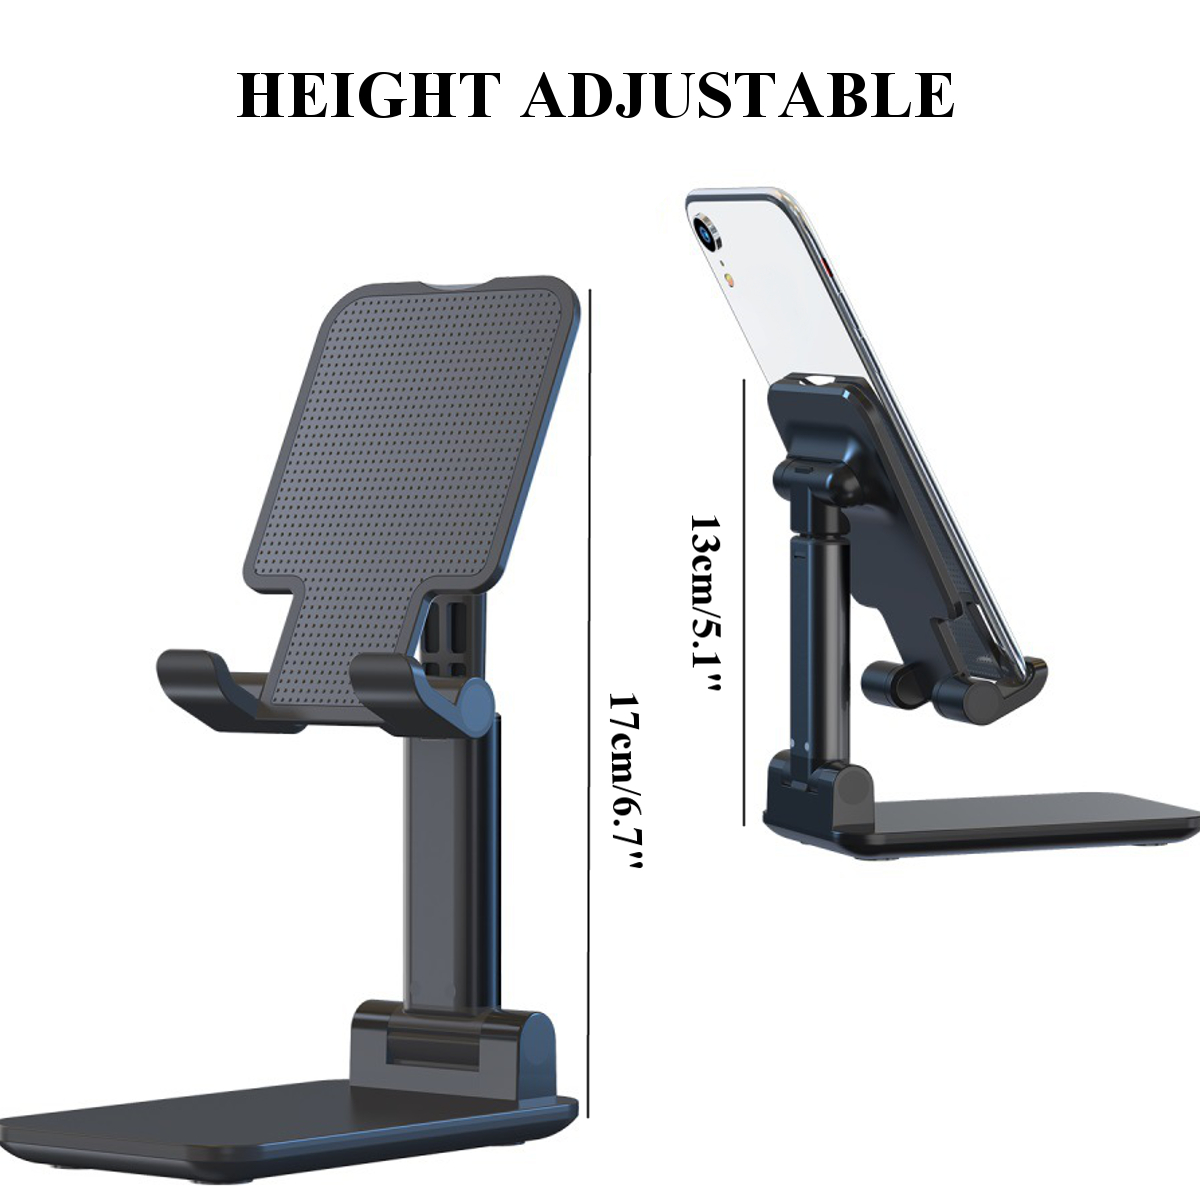 CCT9-Universal-Folding-Telescopic-Desktop-Mobile-Phone-Tablet-Holder-Stand-for-iPad-Air-for-iPhone-1-1820698-3